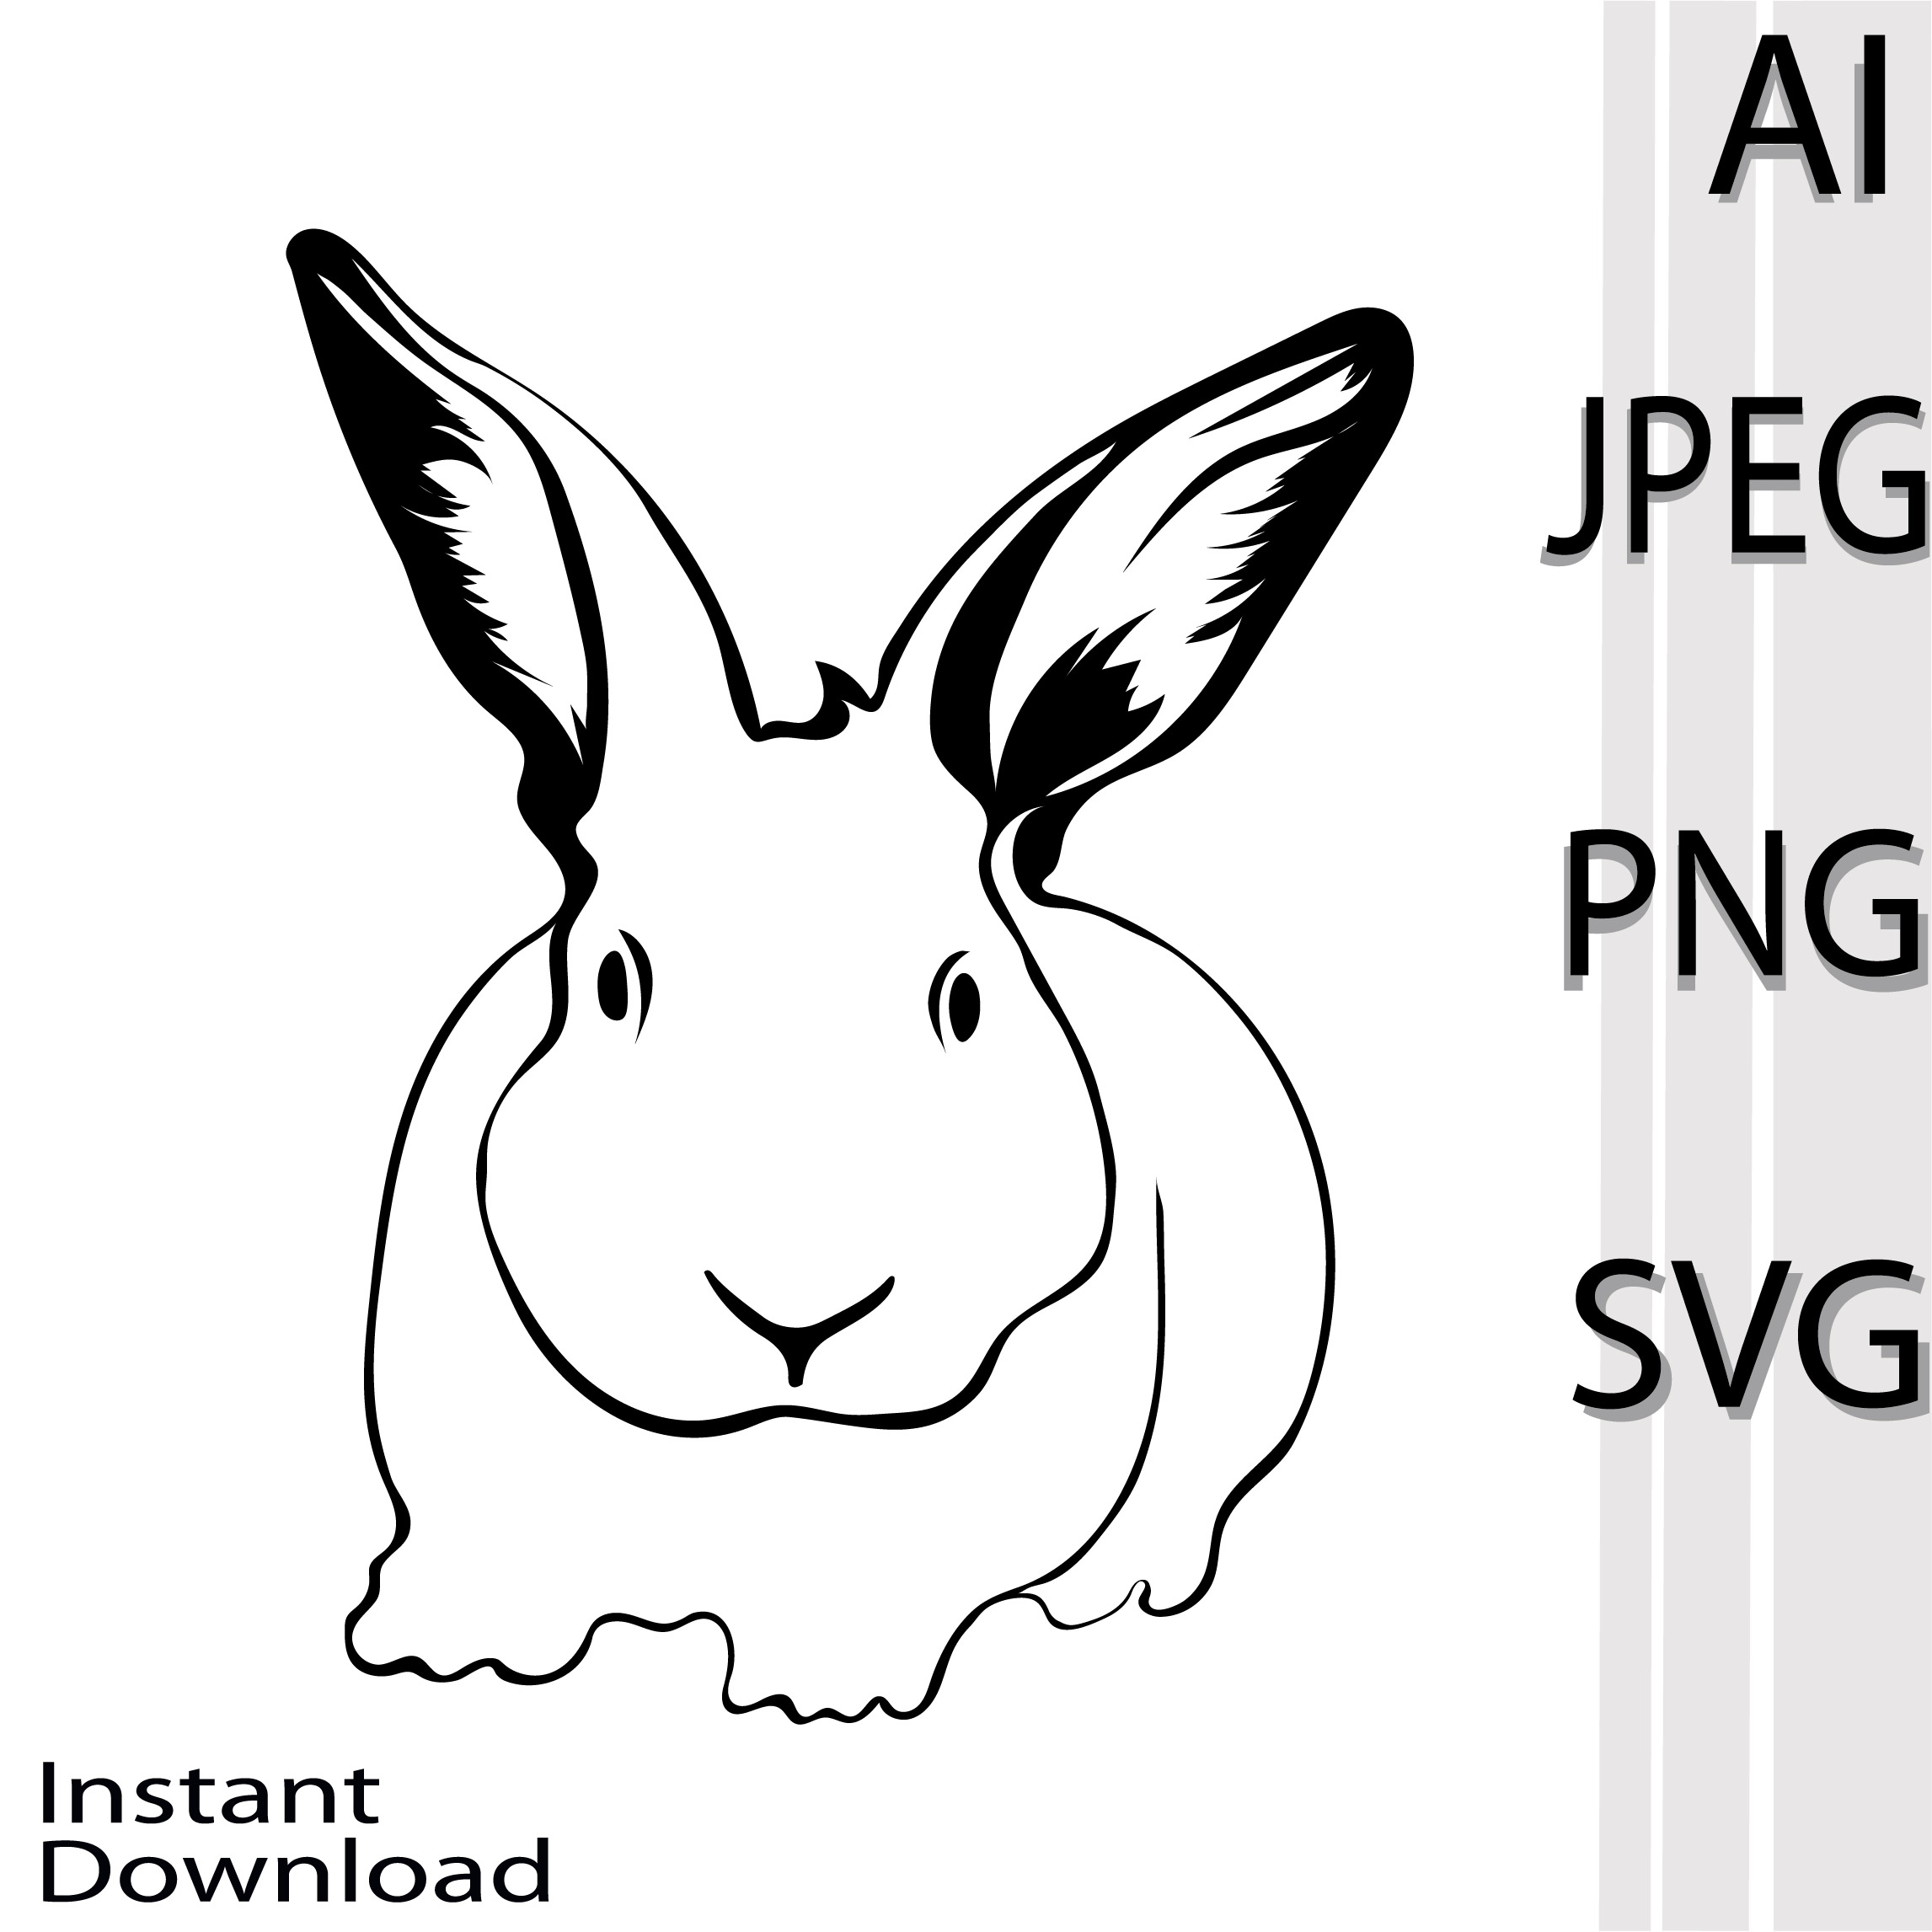 Black and white drawing of a rabbit.